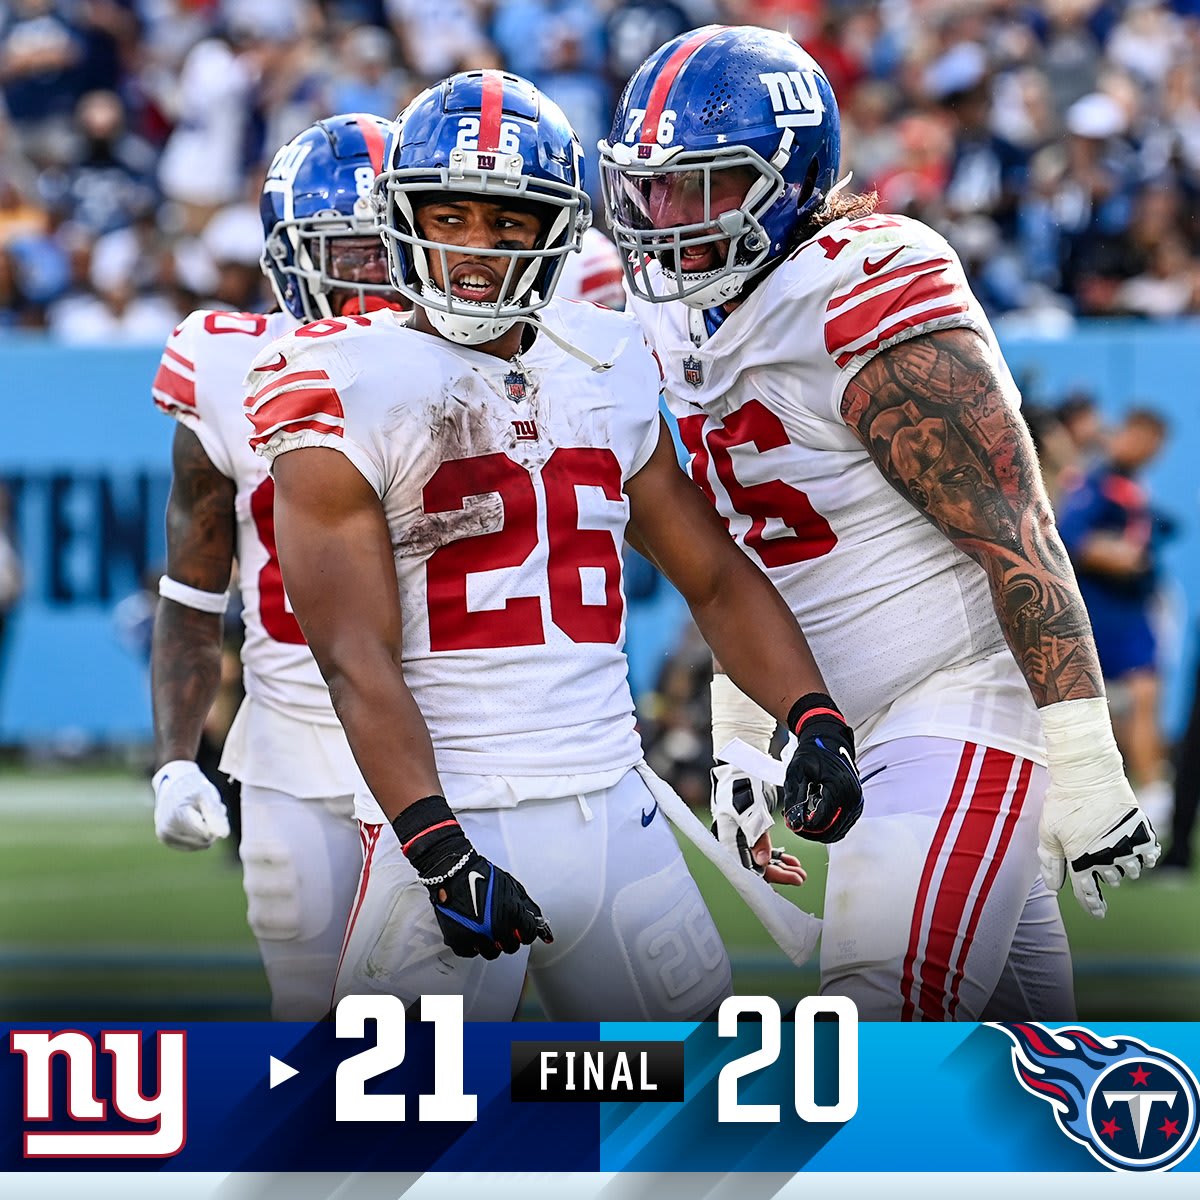 FINAL: The Giants come back and win their season opener.